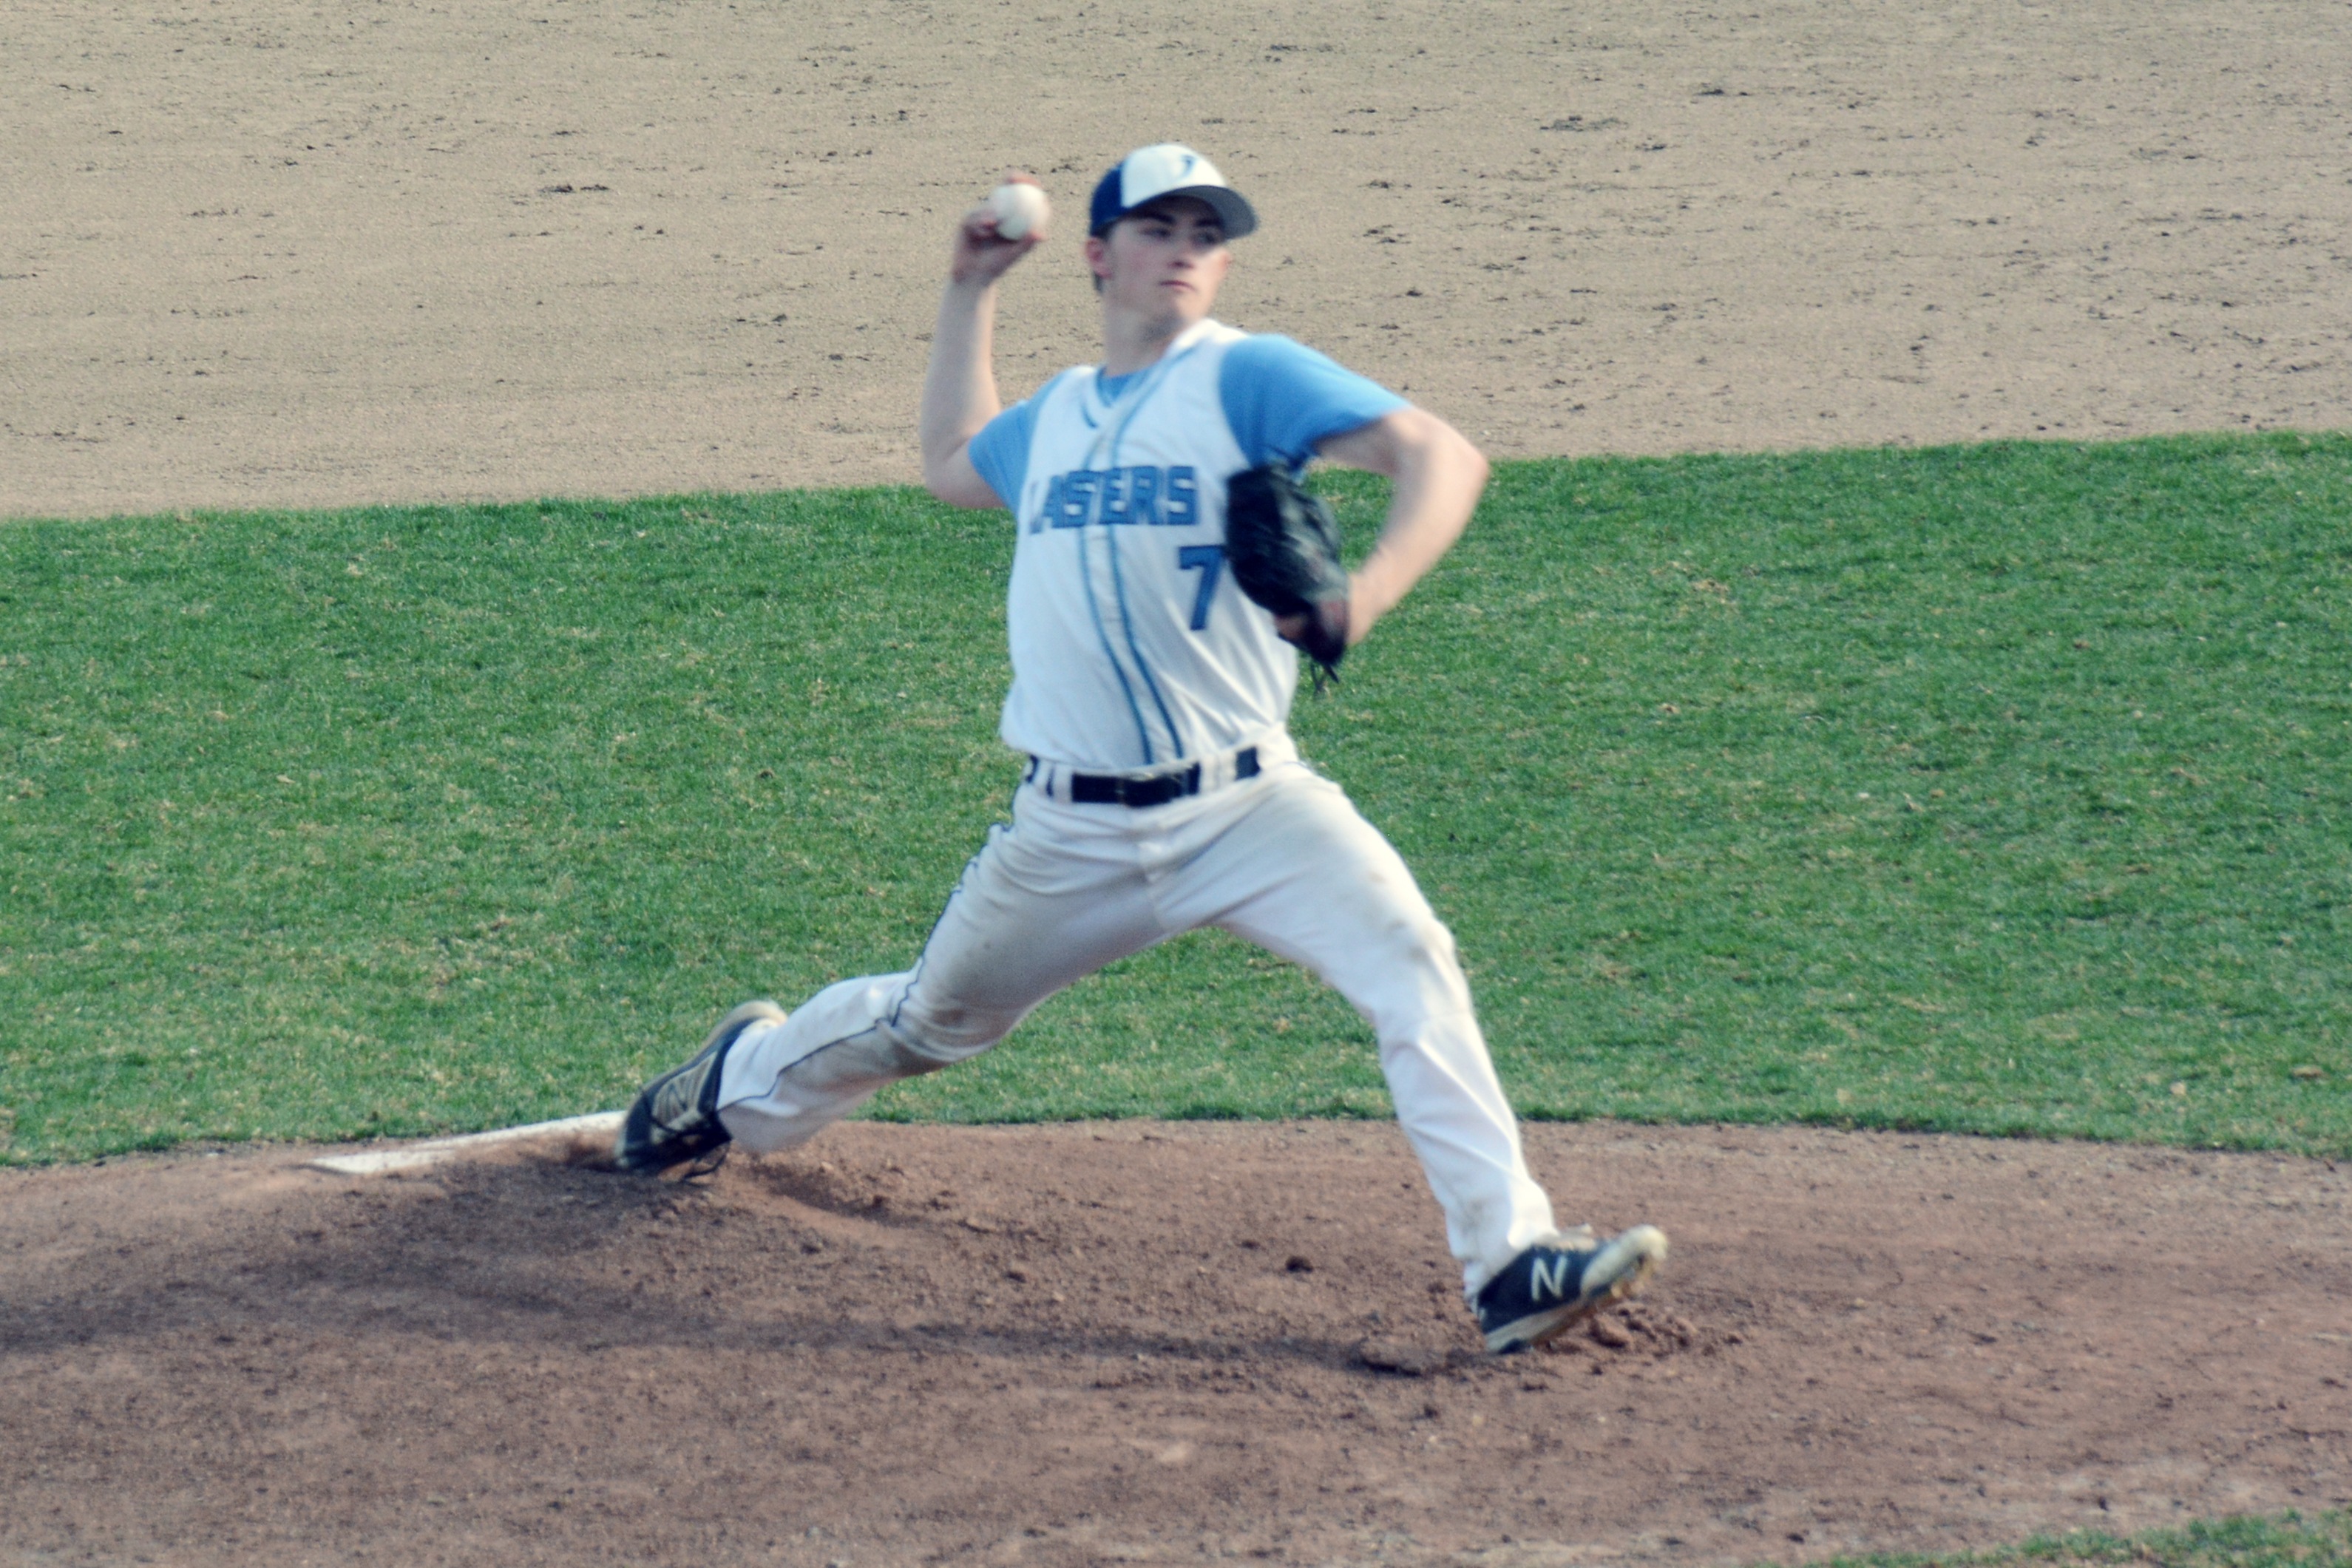 Lasell Baseball advances in GNAC Tournament with win over Norwich